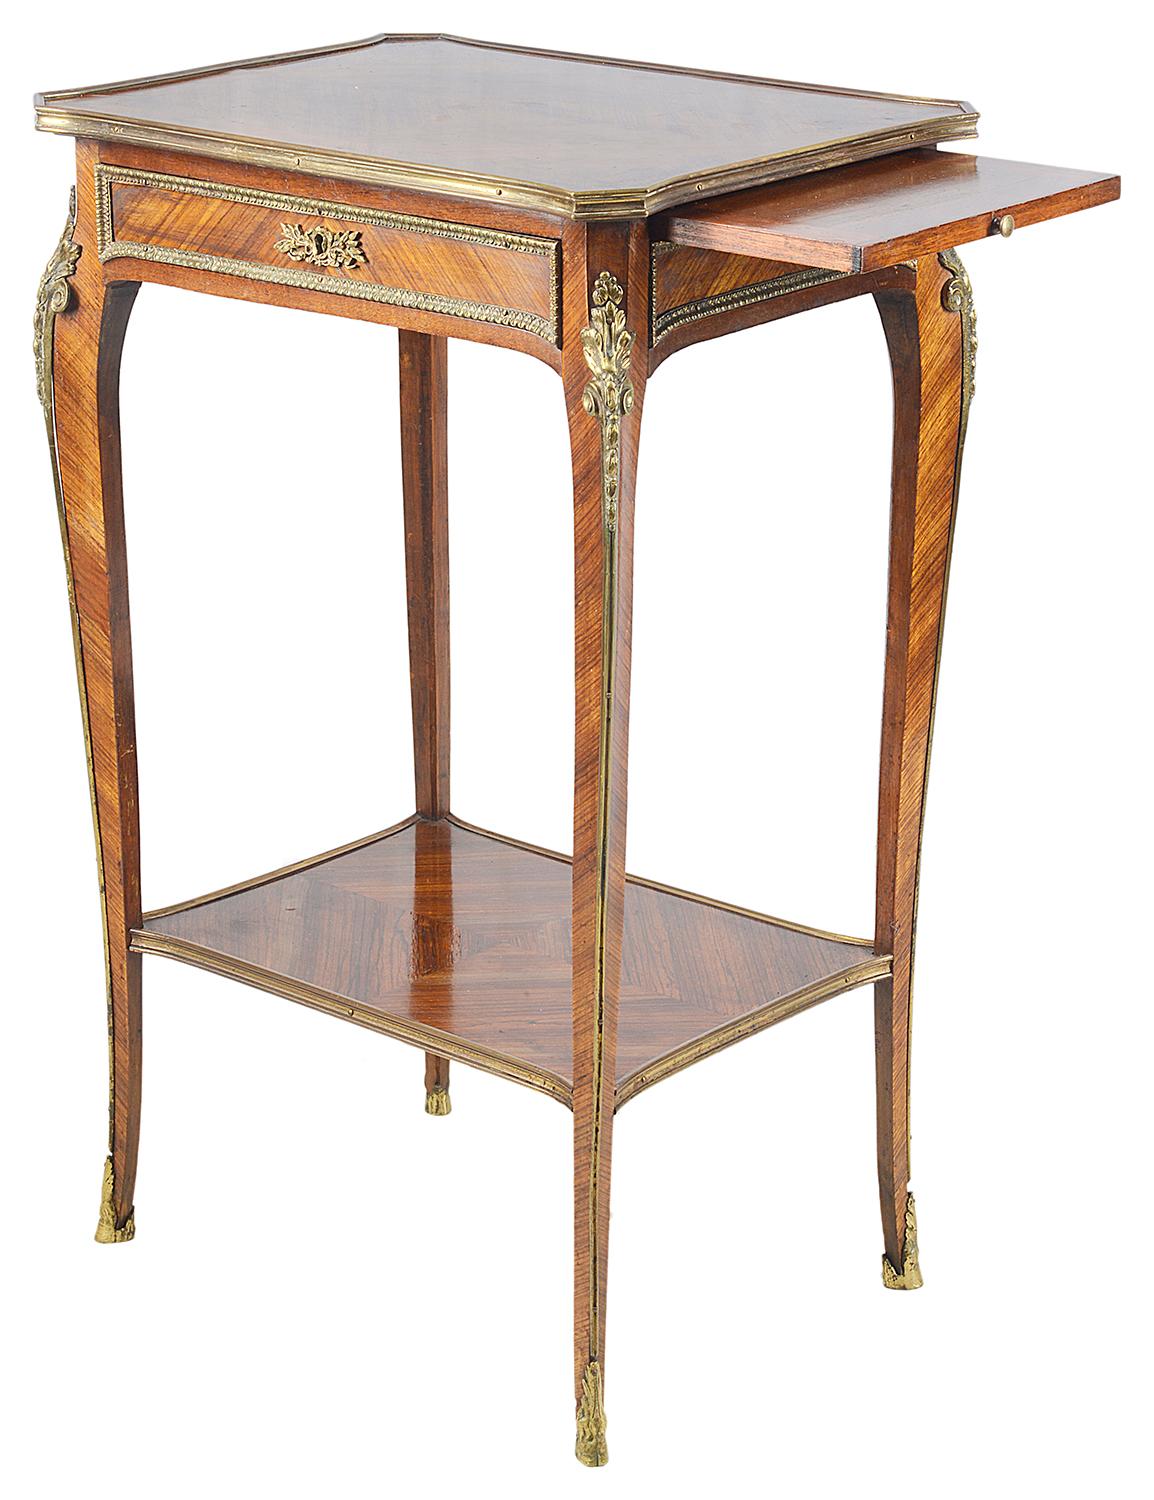 A good quality pair of French Louis XVI style Kingwood side tables, each with a single frieze drawer, gilded ormolu mounts, raised on elegant cabriole legs and a shelf beneath, circa 1900.